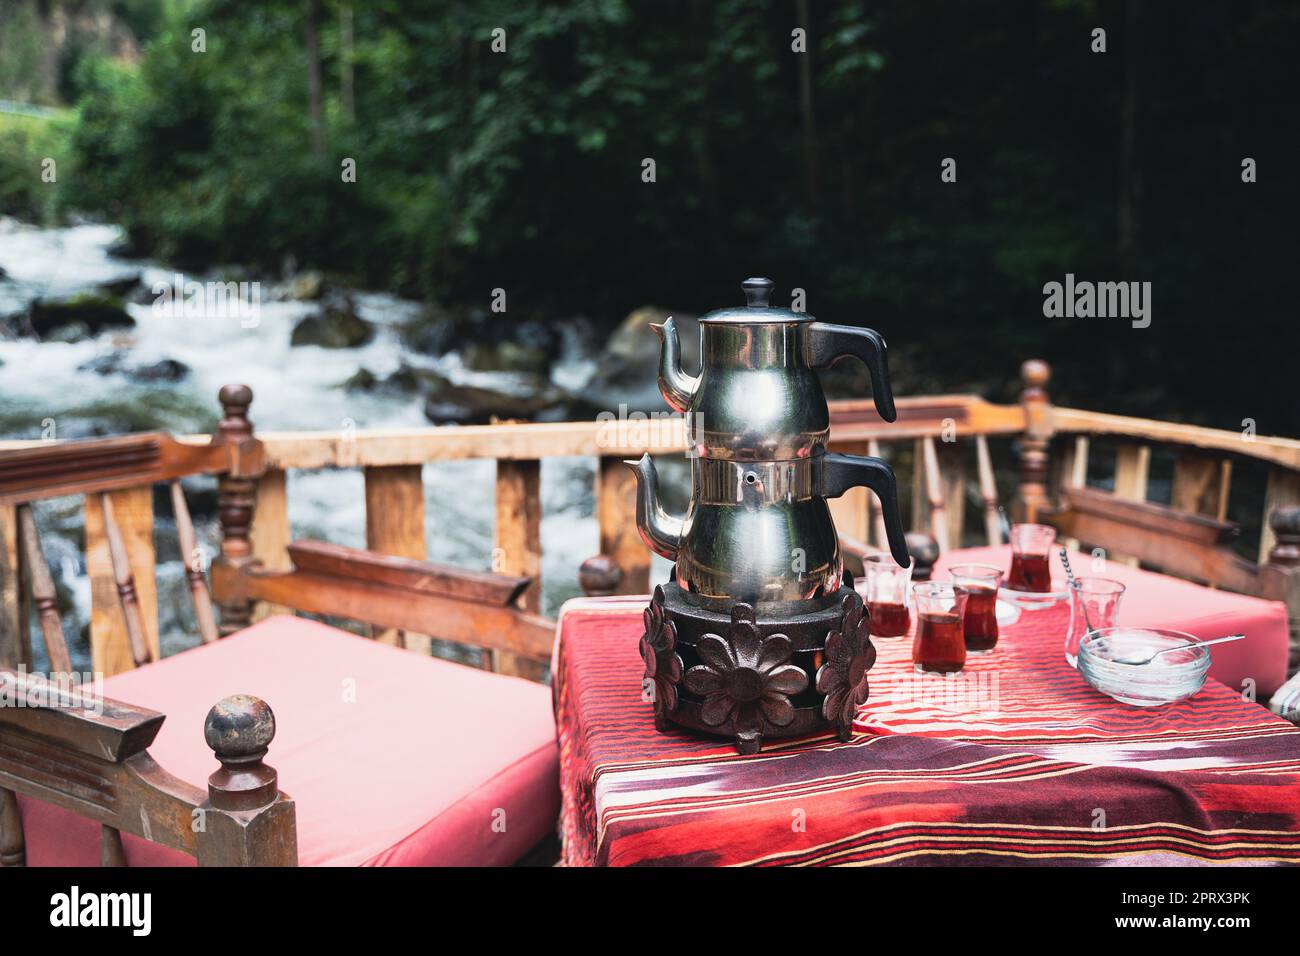 traditional Turkish tea chrome kettle and glasses served on a restaurant table with chairs near a river in an outdoor setting Stock Photo